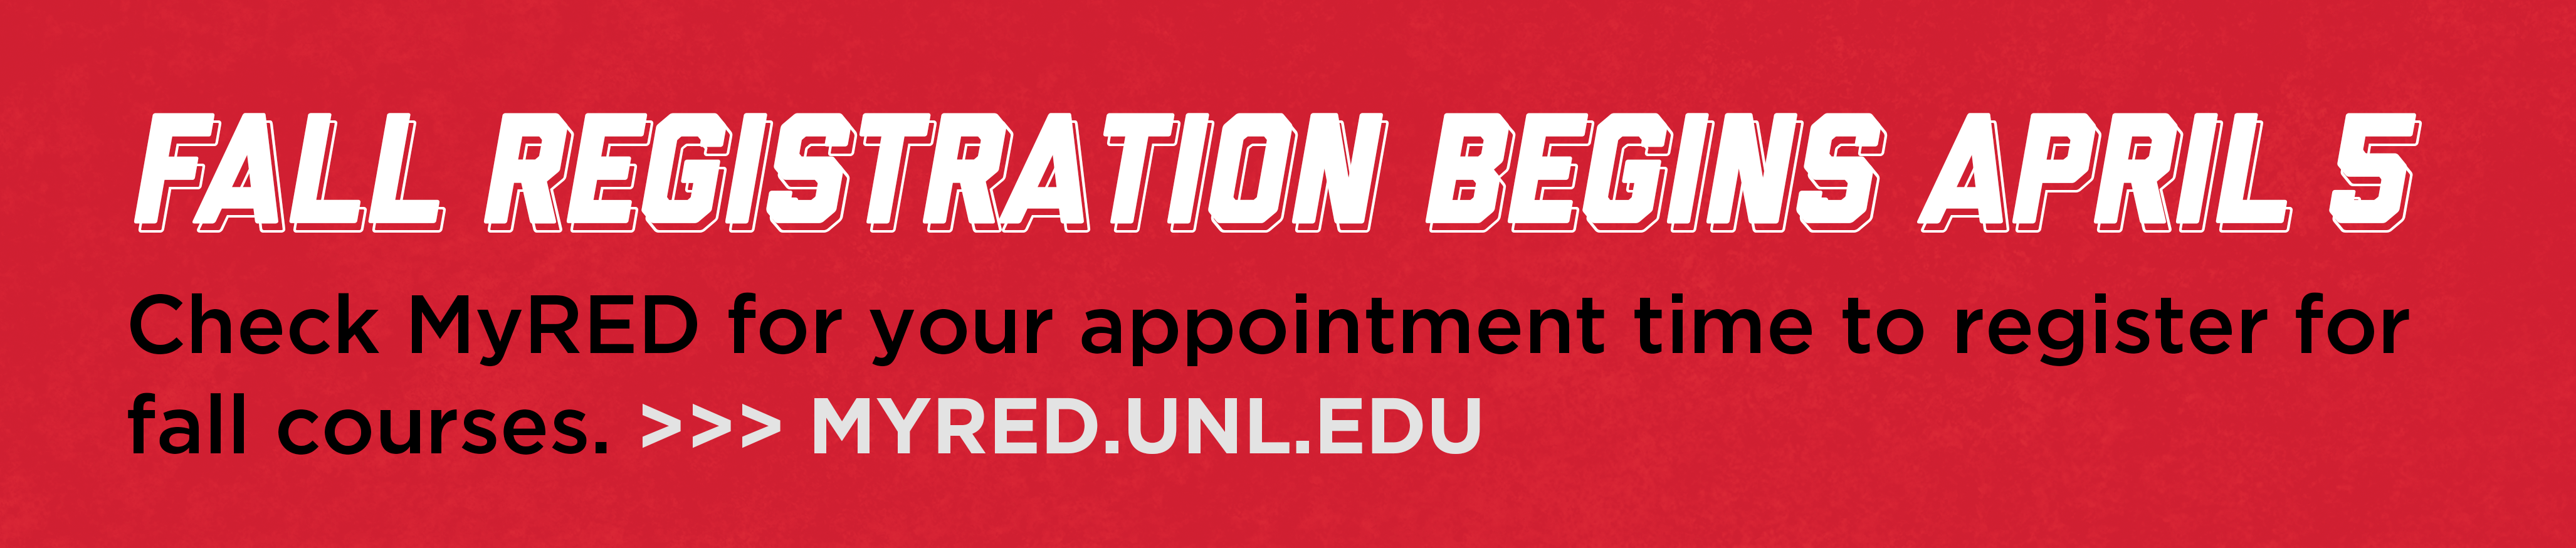 Fall Registration begins April 5. Check myRed for your appointment time to register for fall courses. >>> https://myred.unl.edu